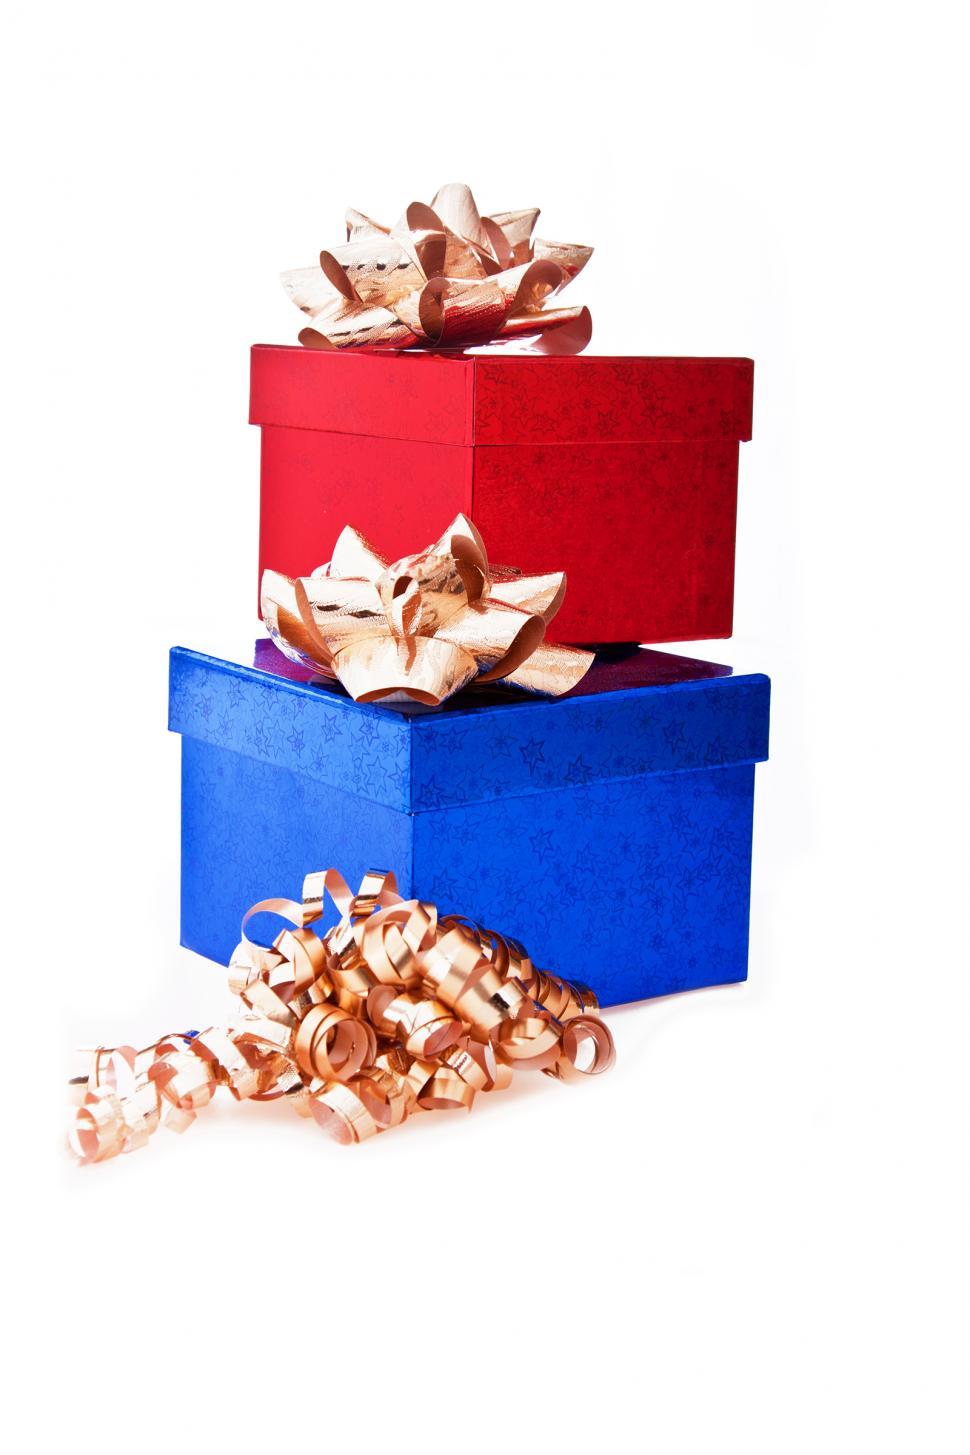 Free Stock Photo of Gift boxes | Download Free Images and Free ...